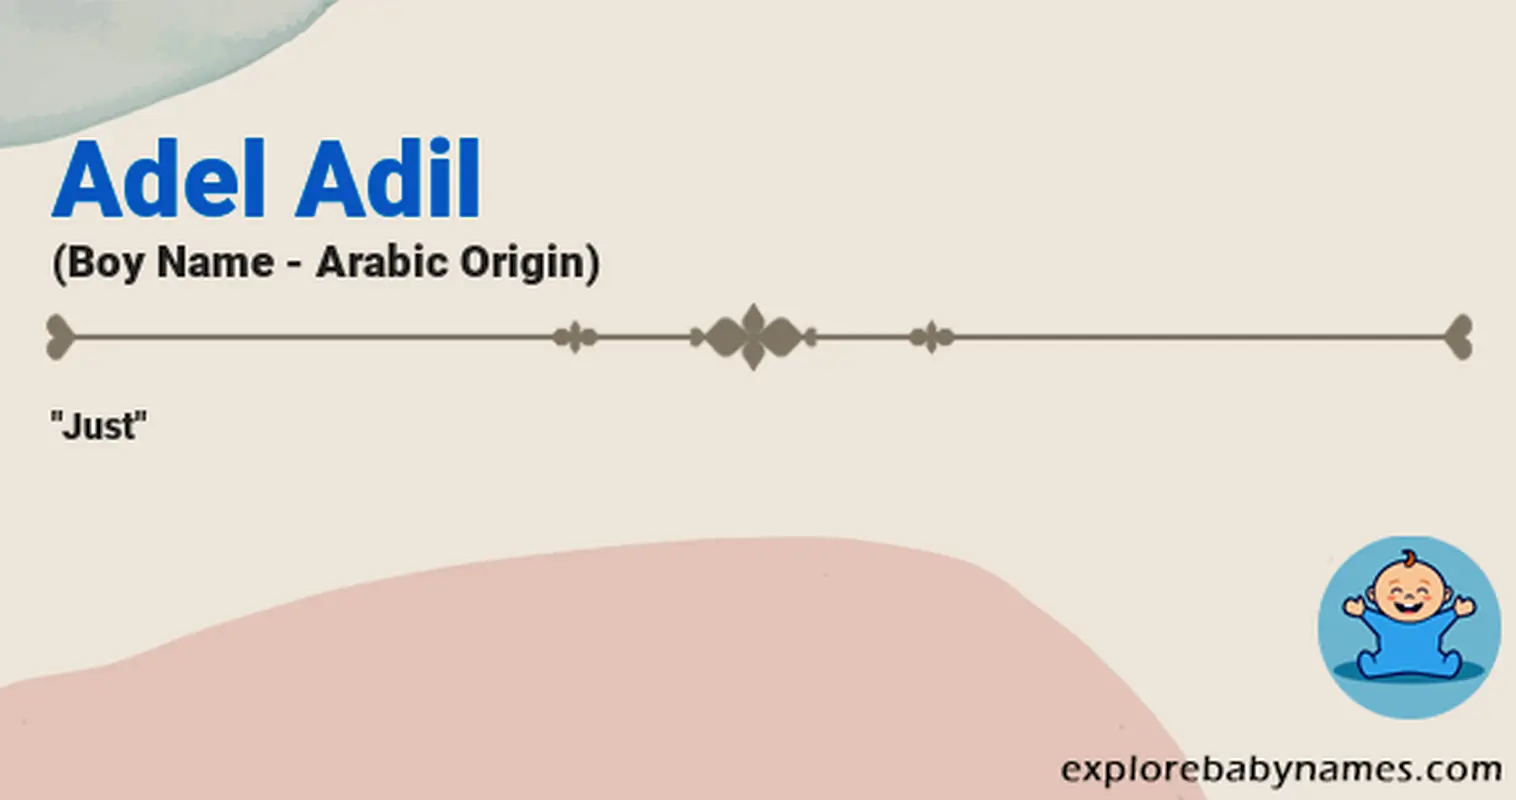 Meaning of Adel Adil